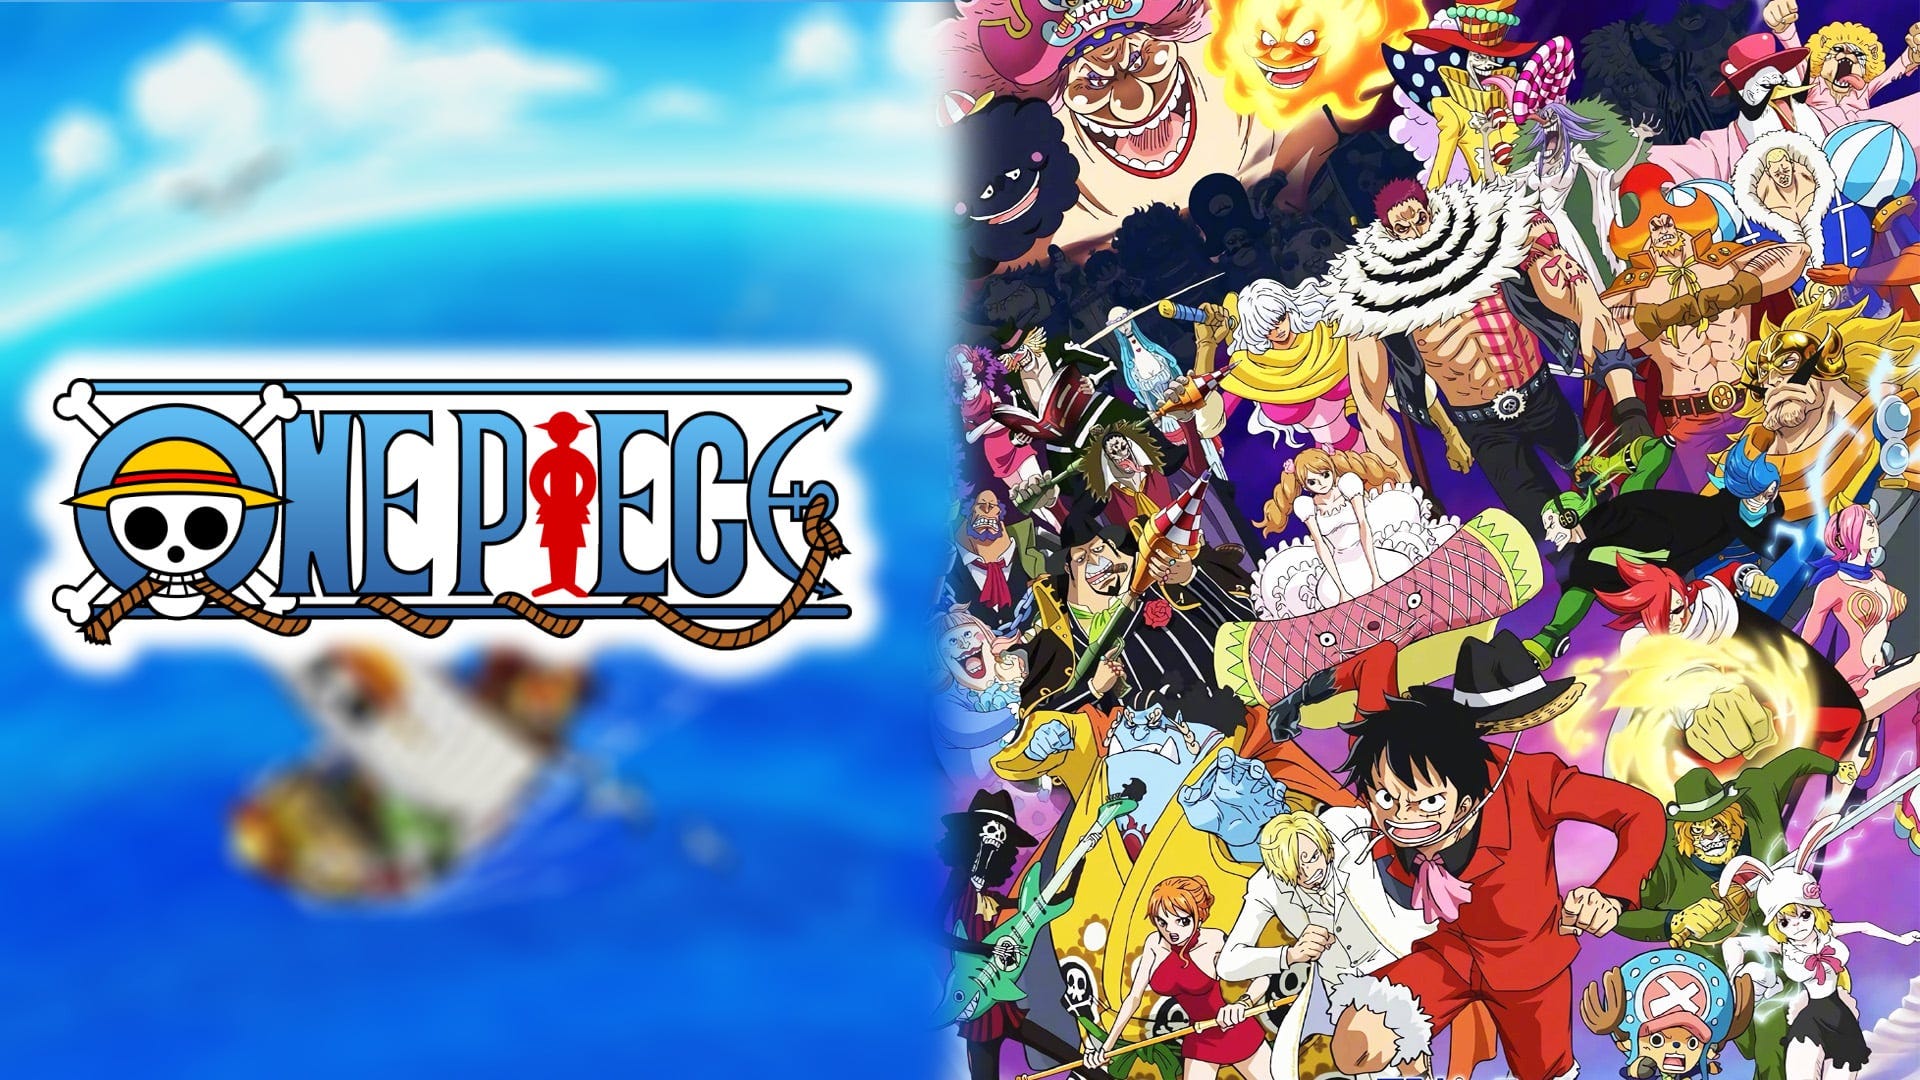 Watch One Piece Series 21 Episode 945 Full Episode By Cepi Fc One Piece S21xe945 Full Oct Medium